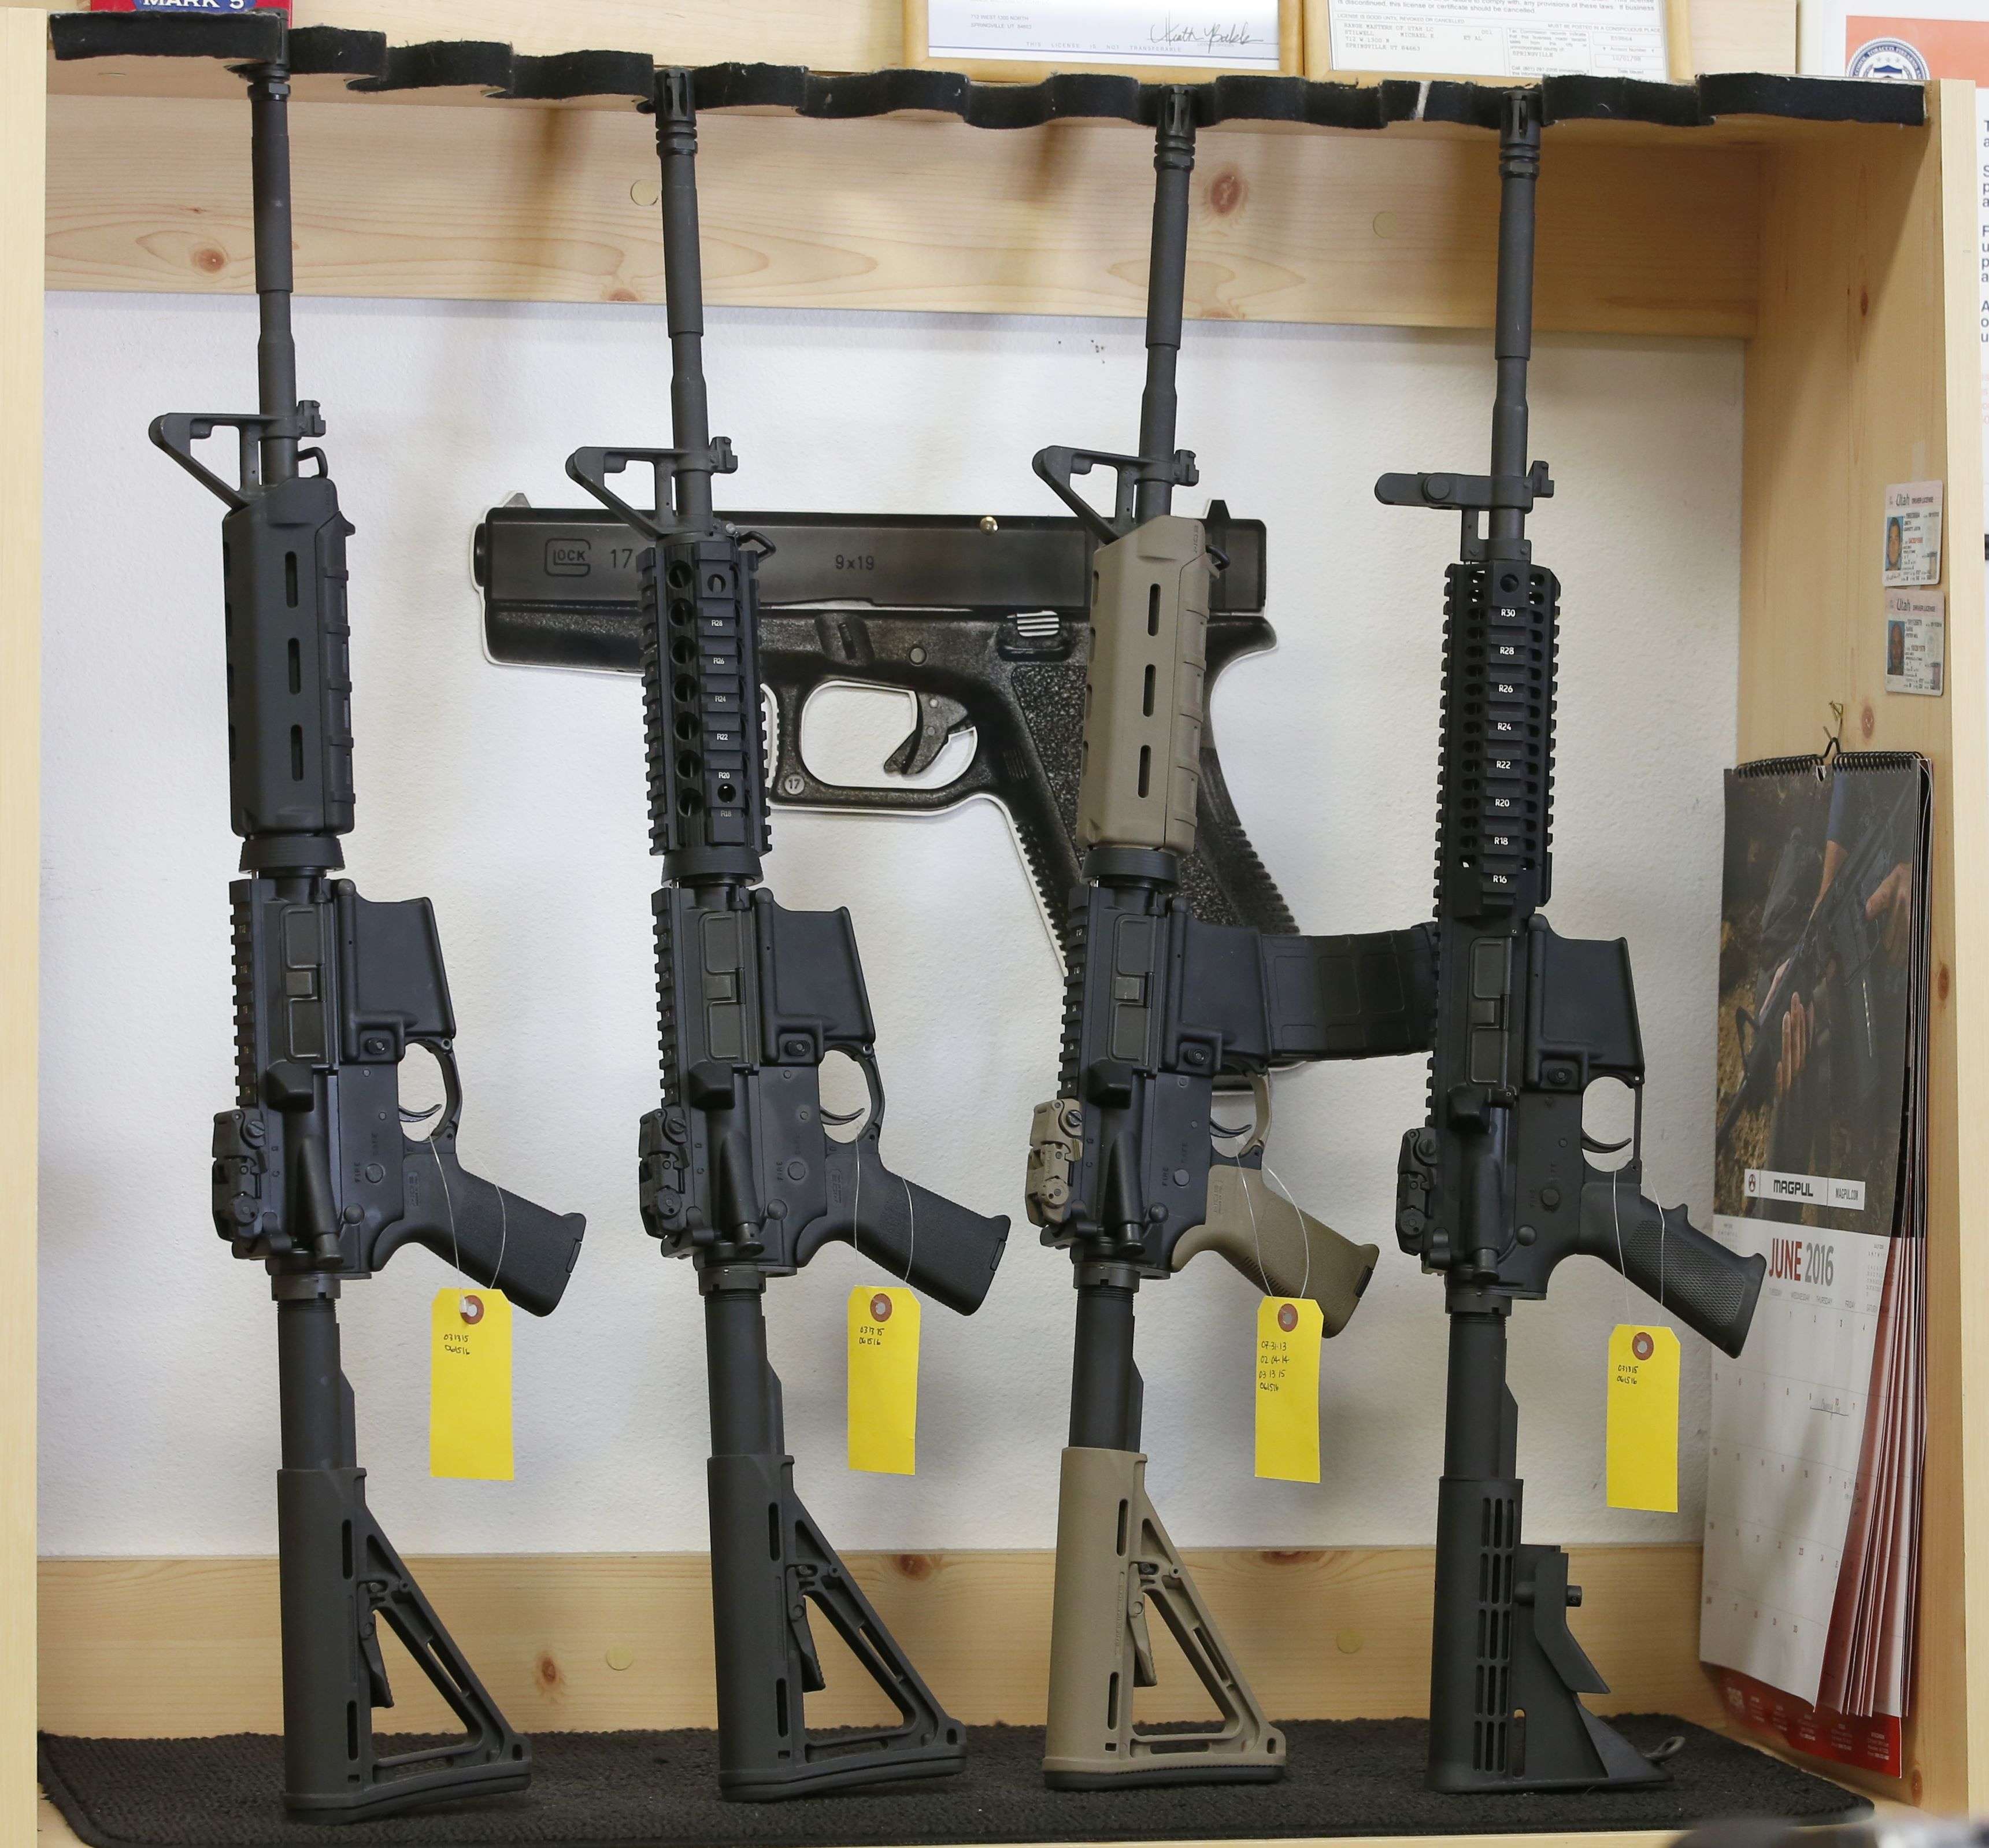 AR-15 semi-automatic rifles are on display for sale at Action Target in Springville, Utah. Photo: AFP